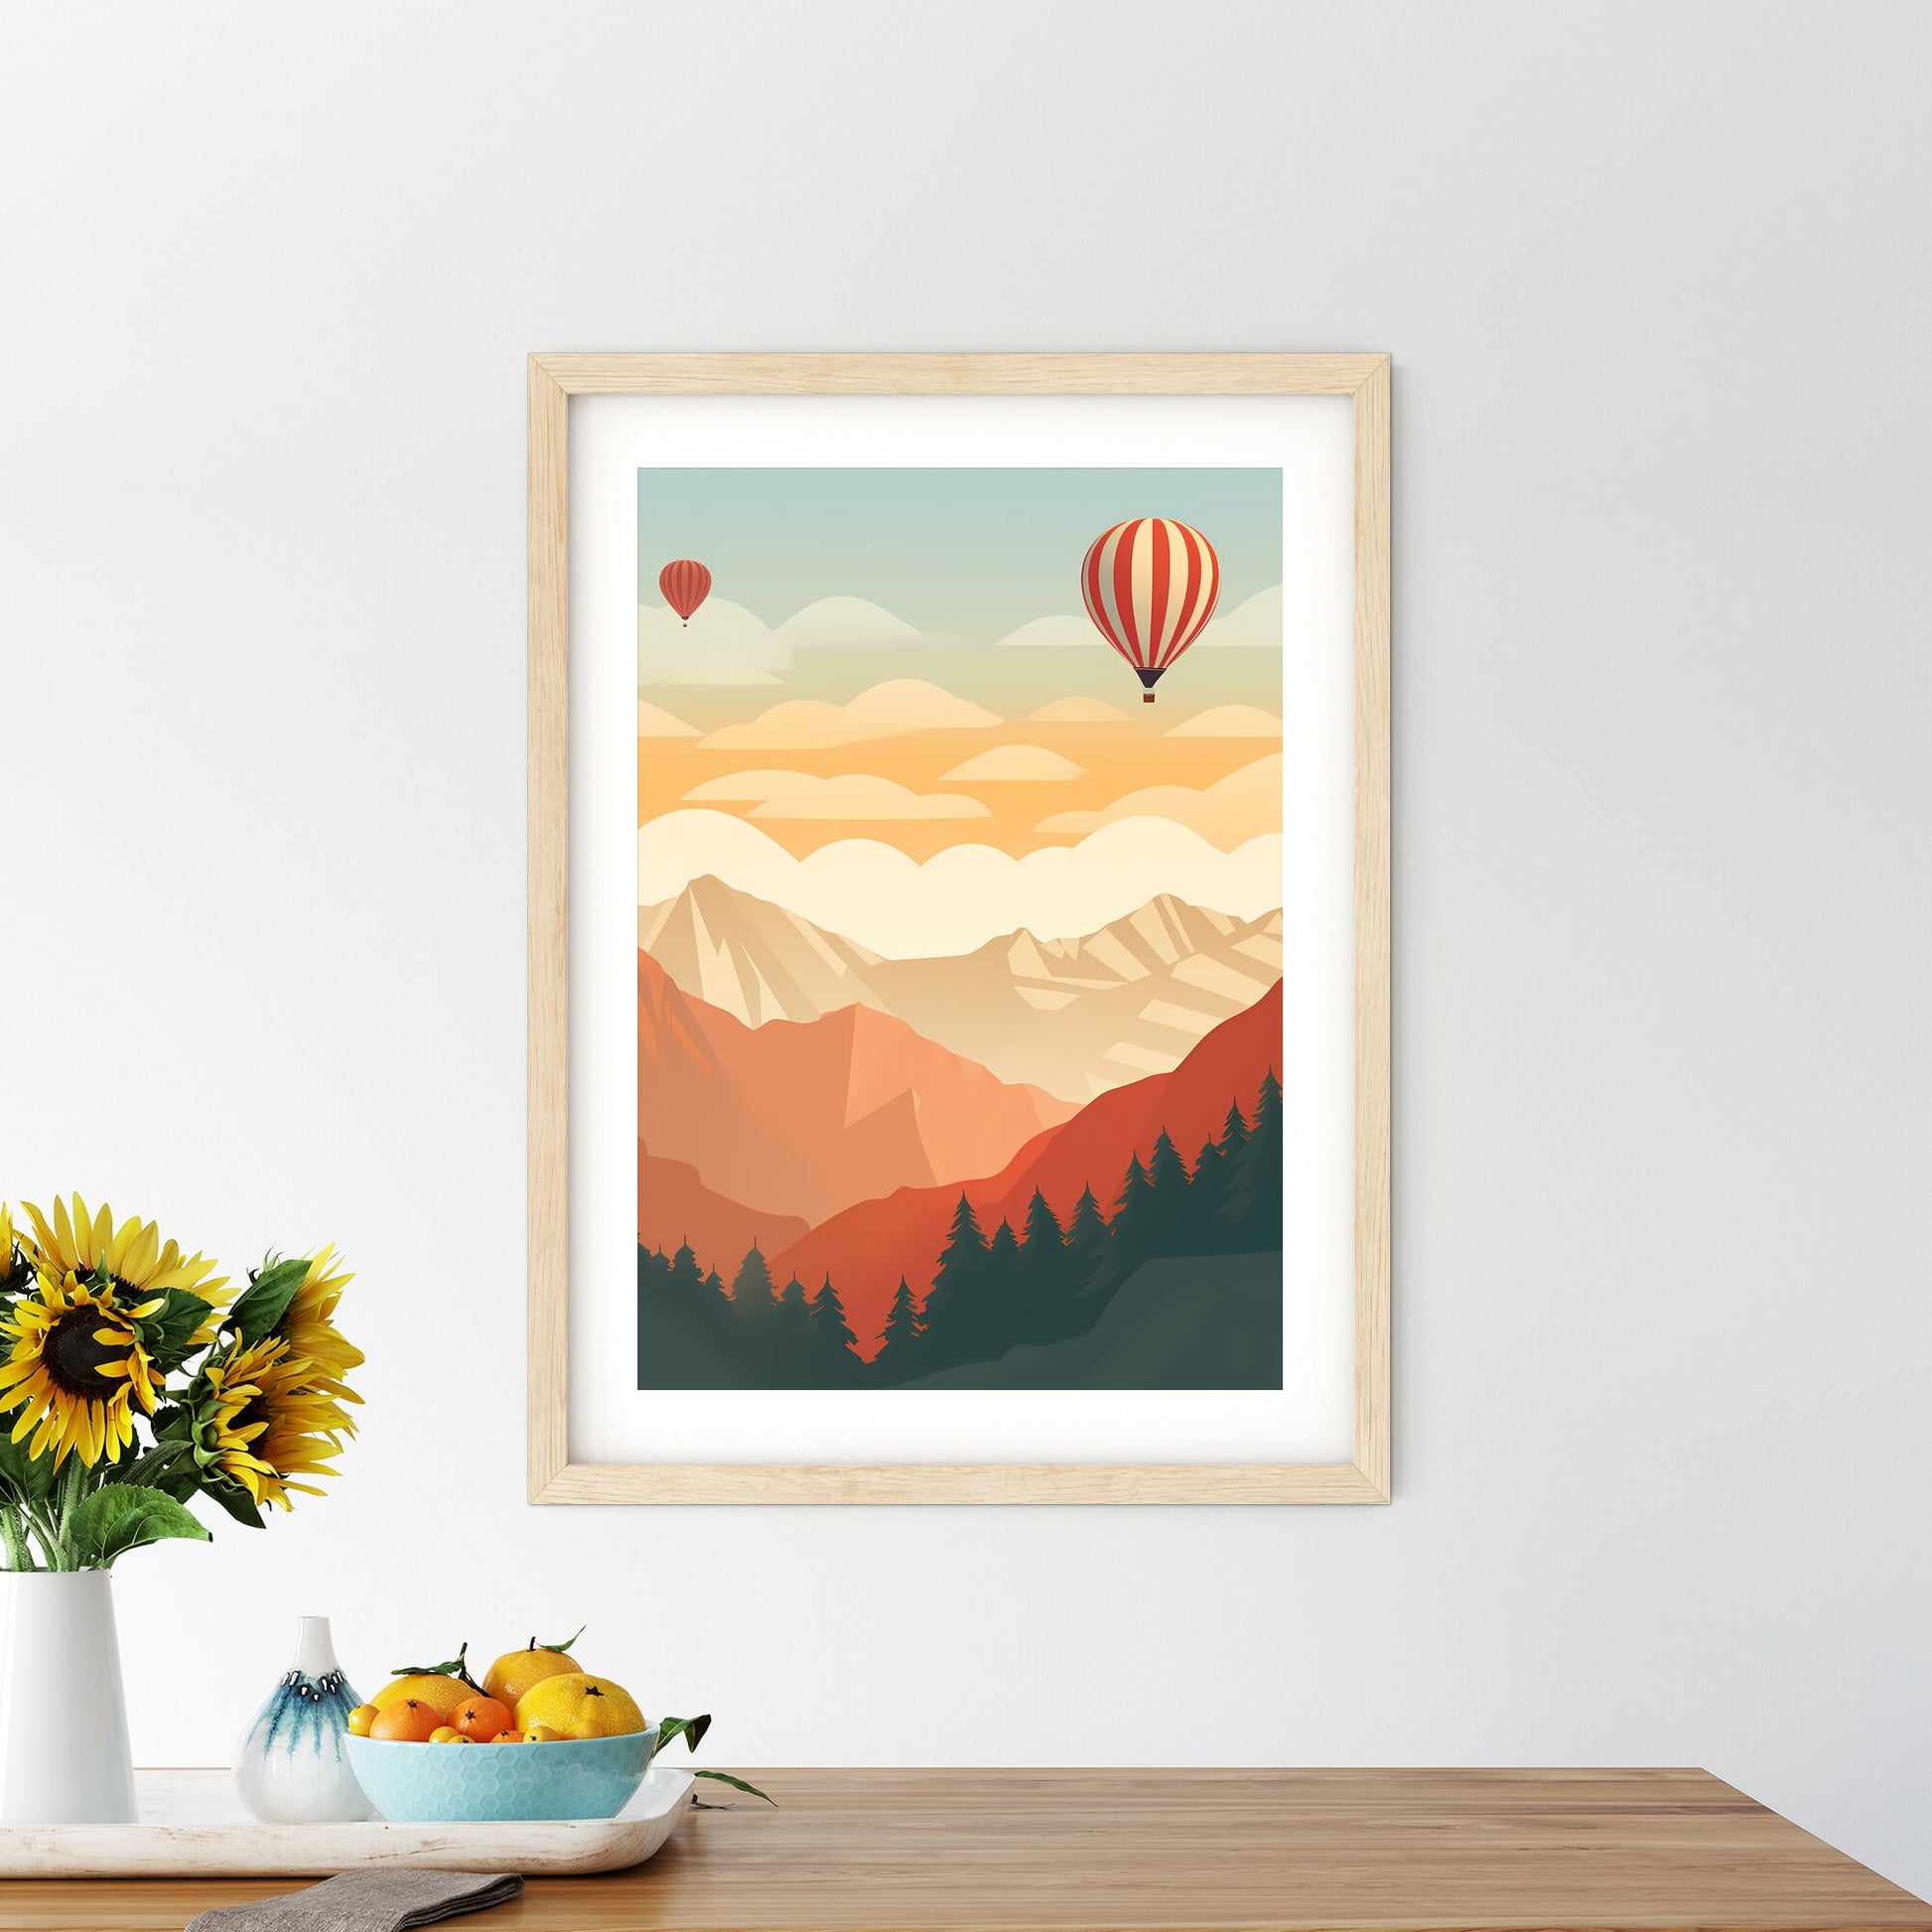 Landscape With Mountains And Hot Air Balloons Art Print Default Title